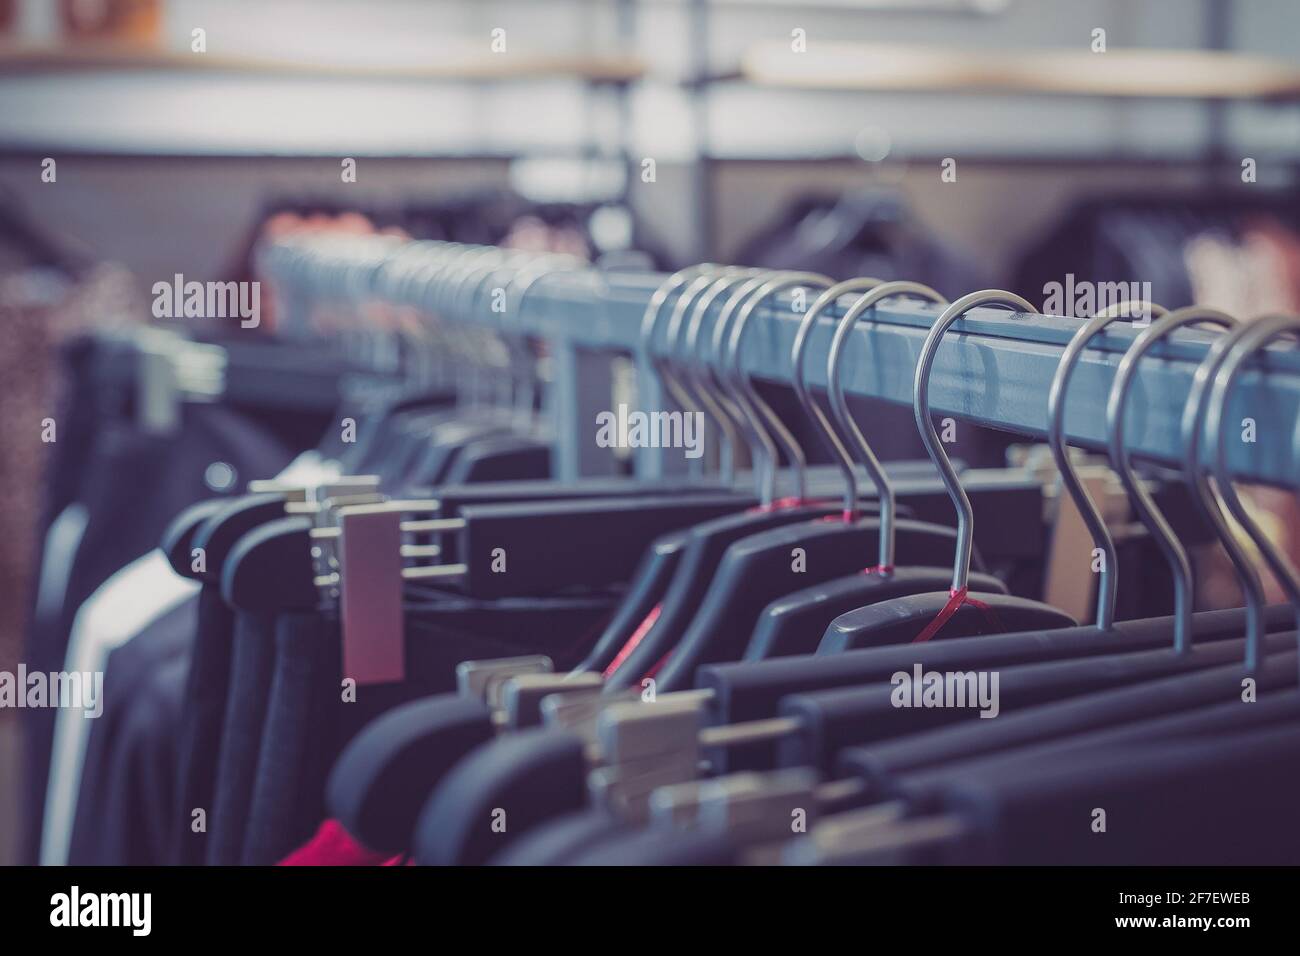 Row of many different clothes hanging on a hanger in a textile shop using classic wire and plastic hangers. Row of clothes in a shop. Stock Photo